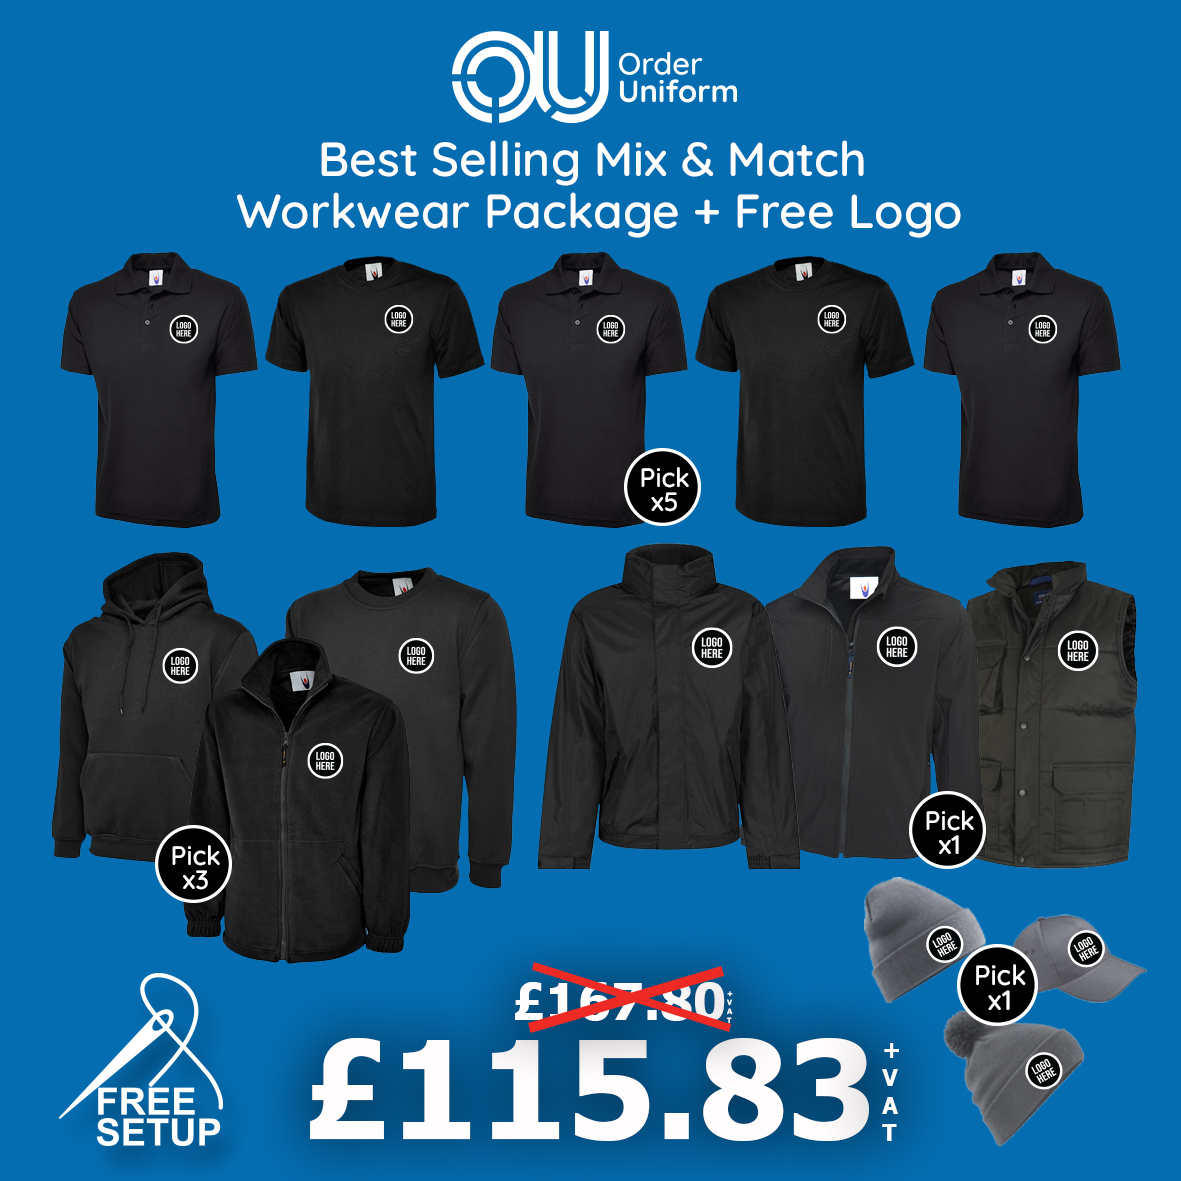 Best Selling Mix & Match Workwear Package + Free Logo 0